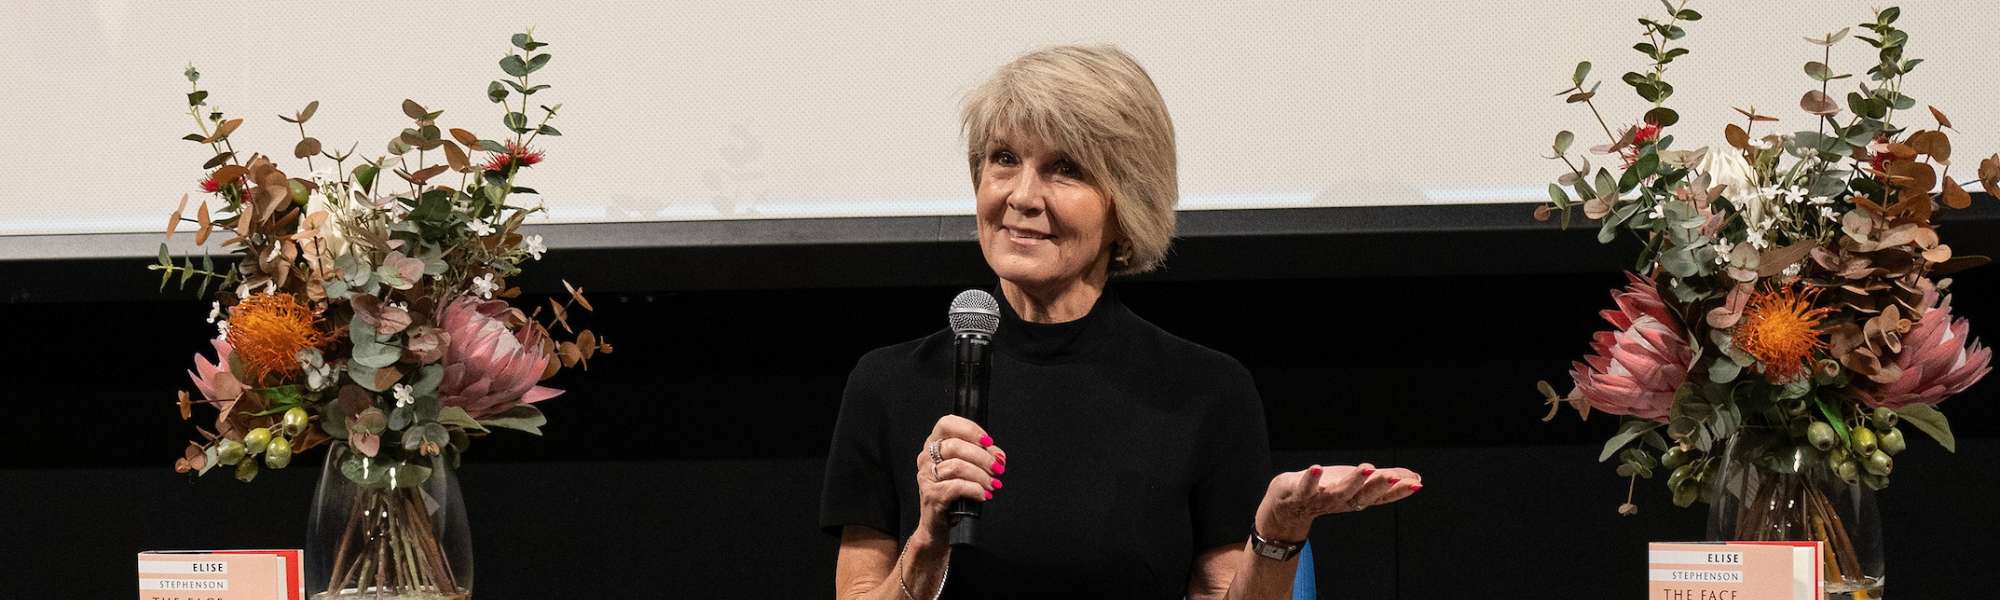 Julie Bishop: ‘Women have the answers’ in international affairs